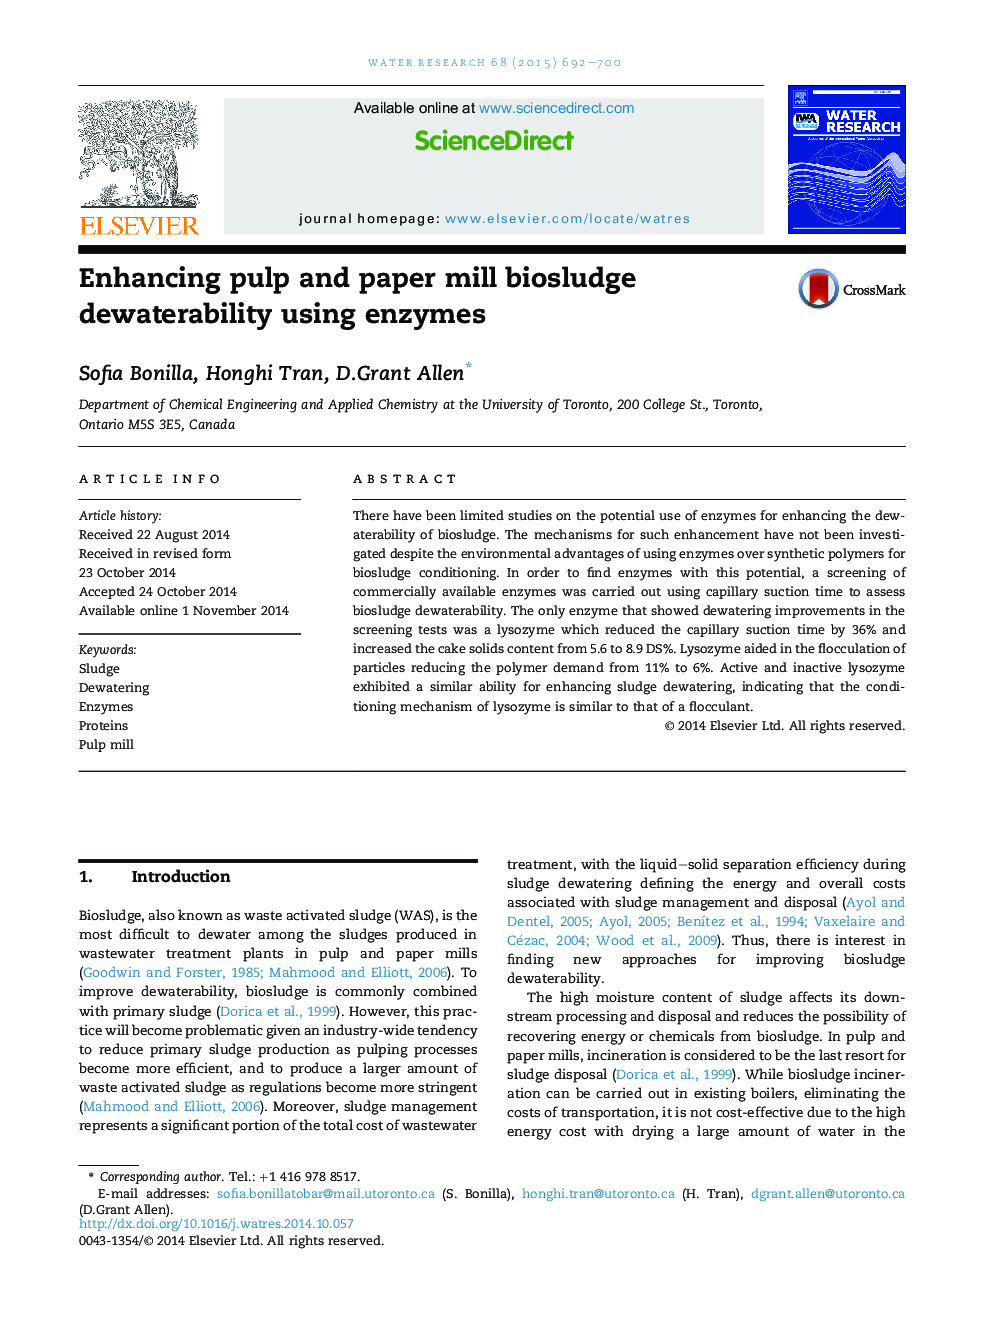 Enhancing pulp and paper mill biosludge dewaterability using enzymes